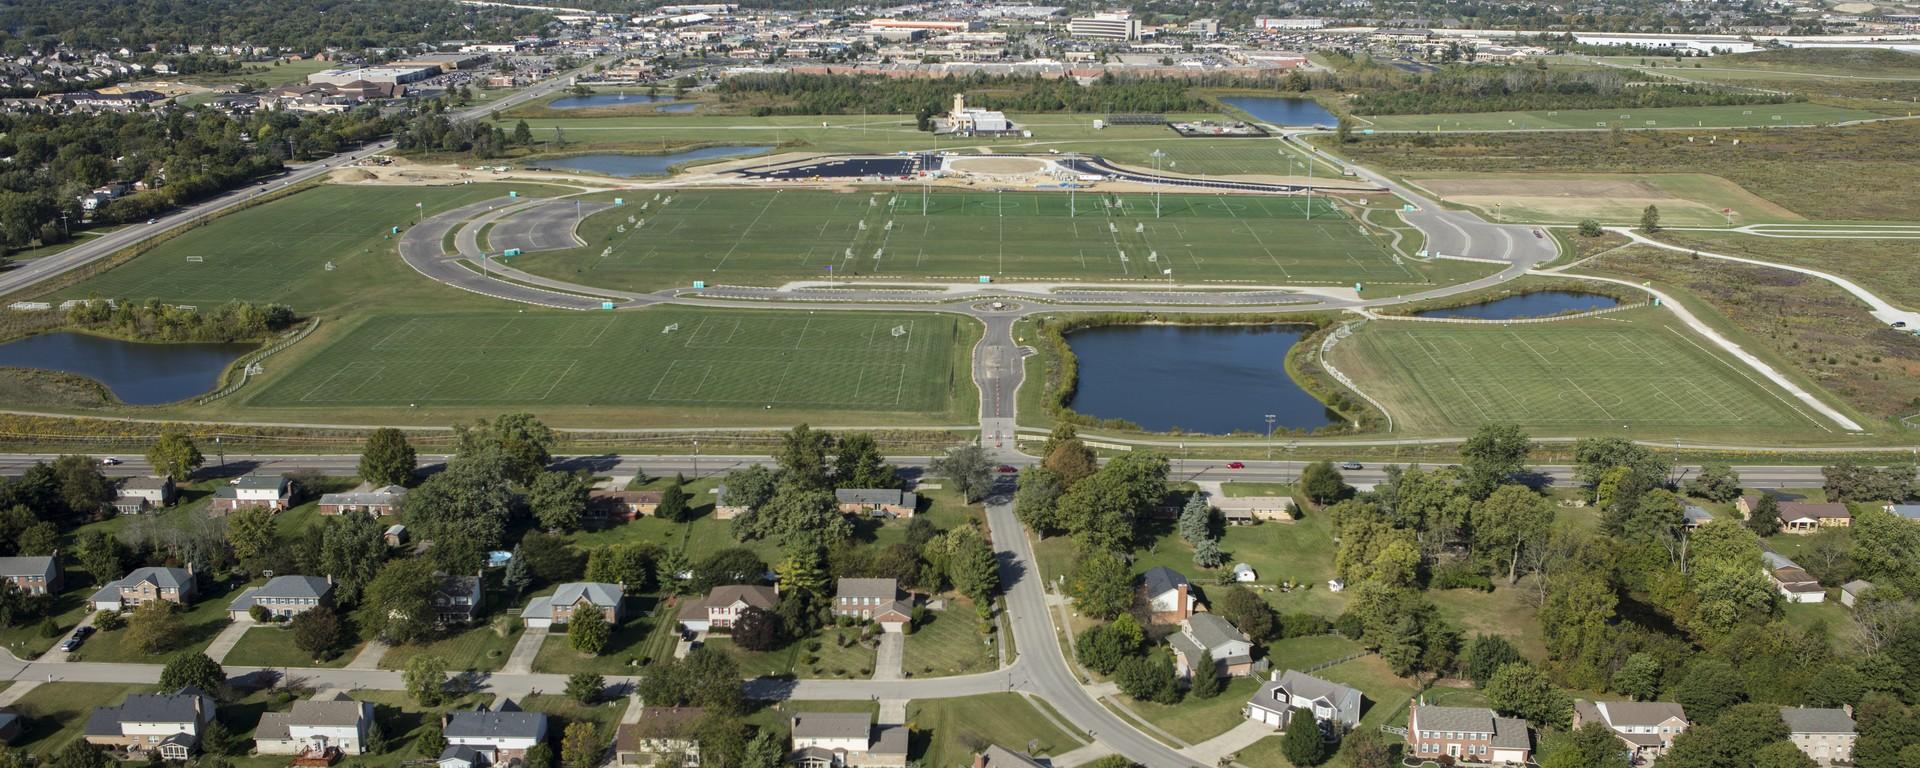 aerial of athletic fields